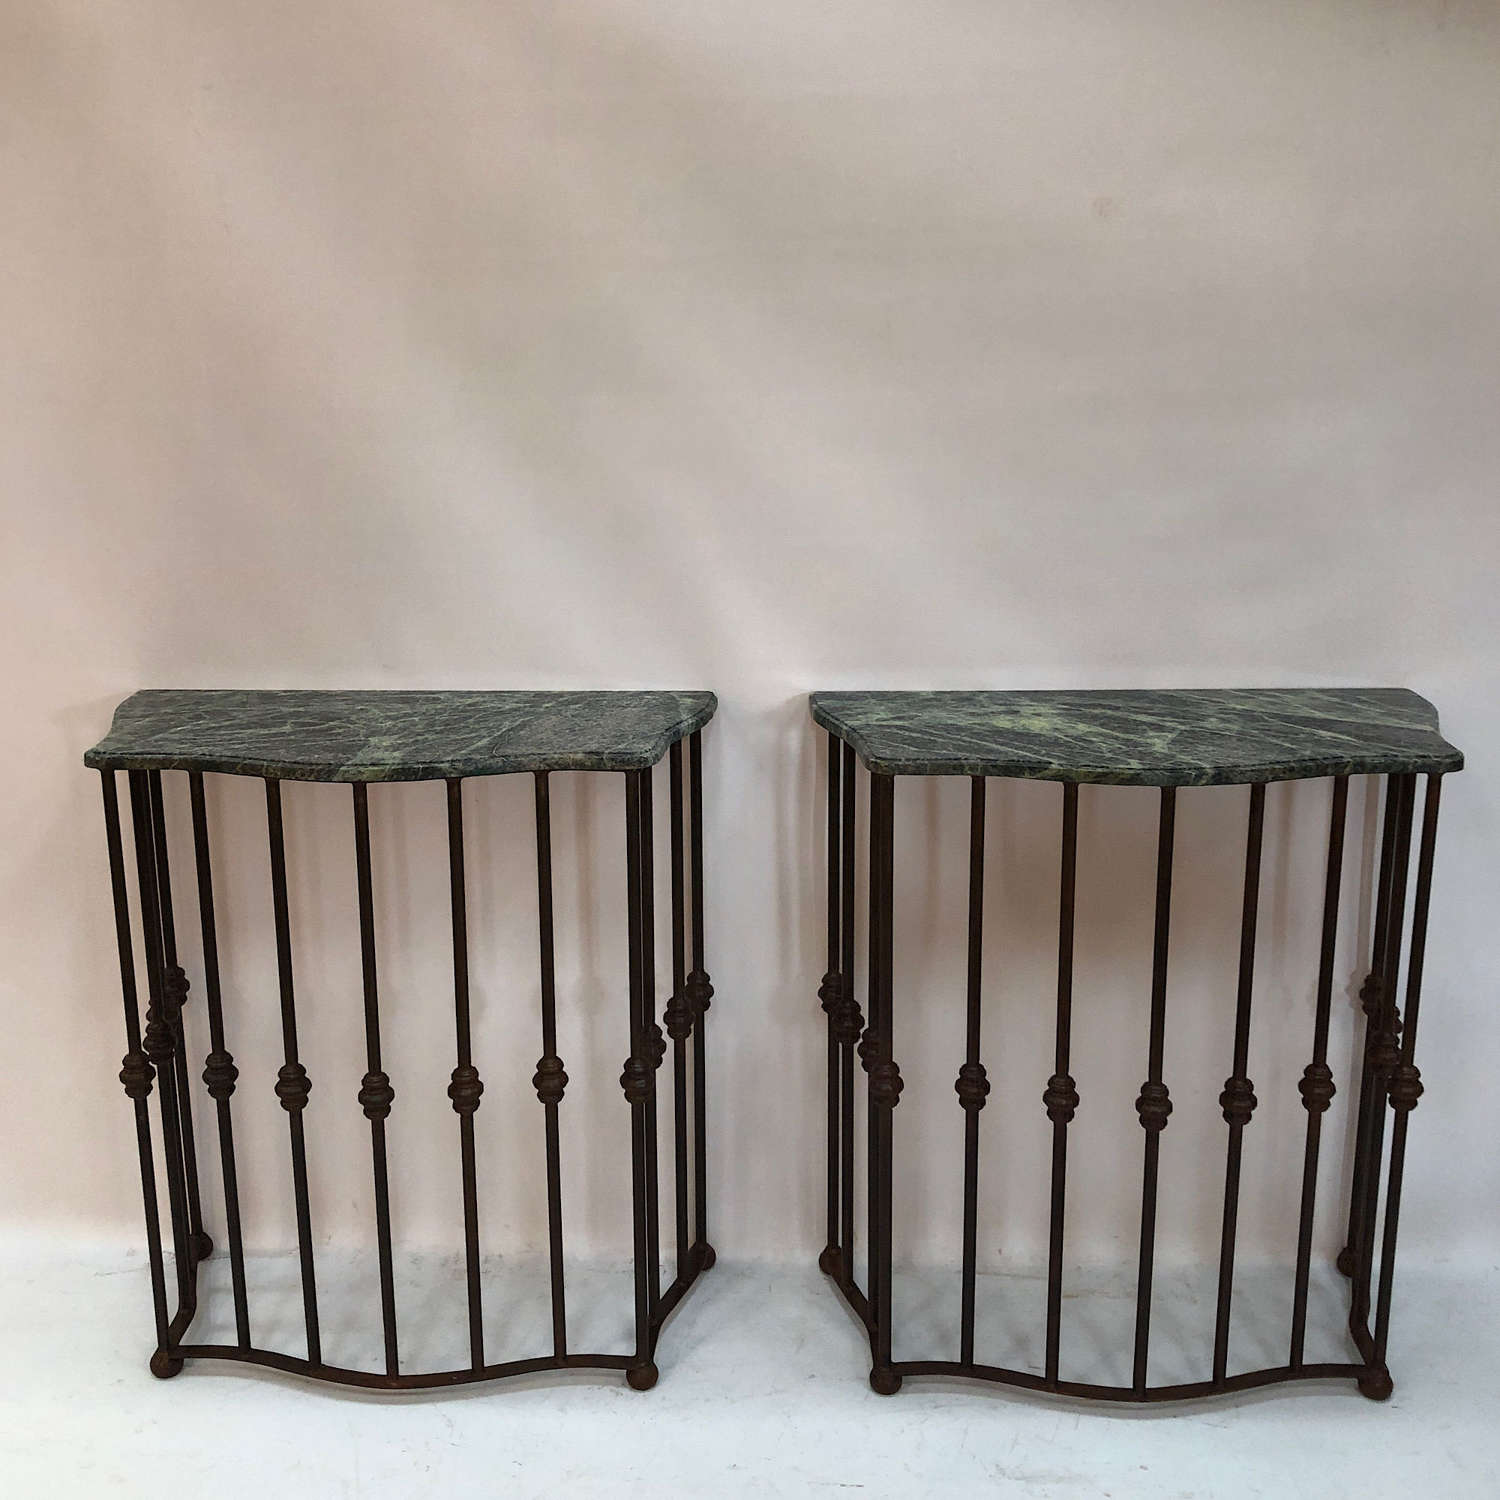 A pair of serpentine wrought iron consoles